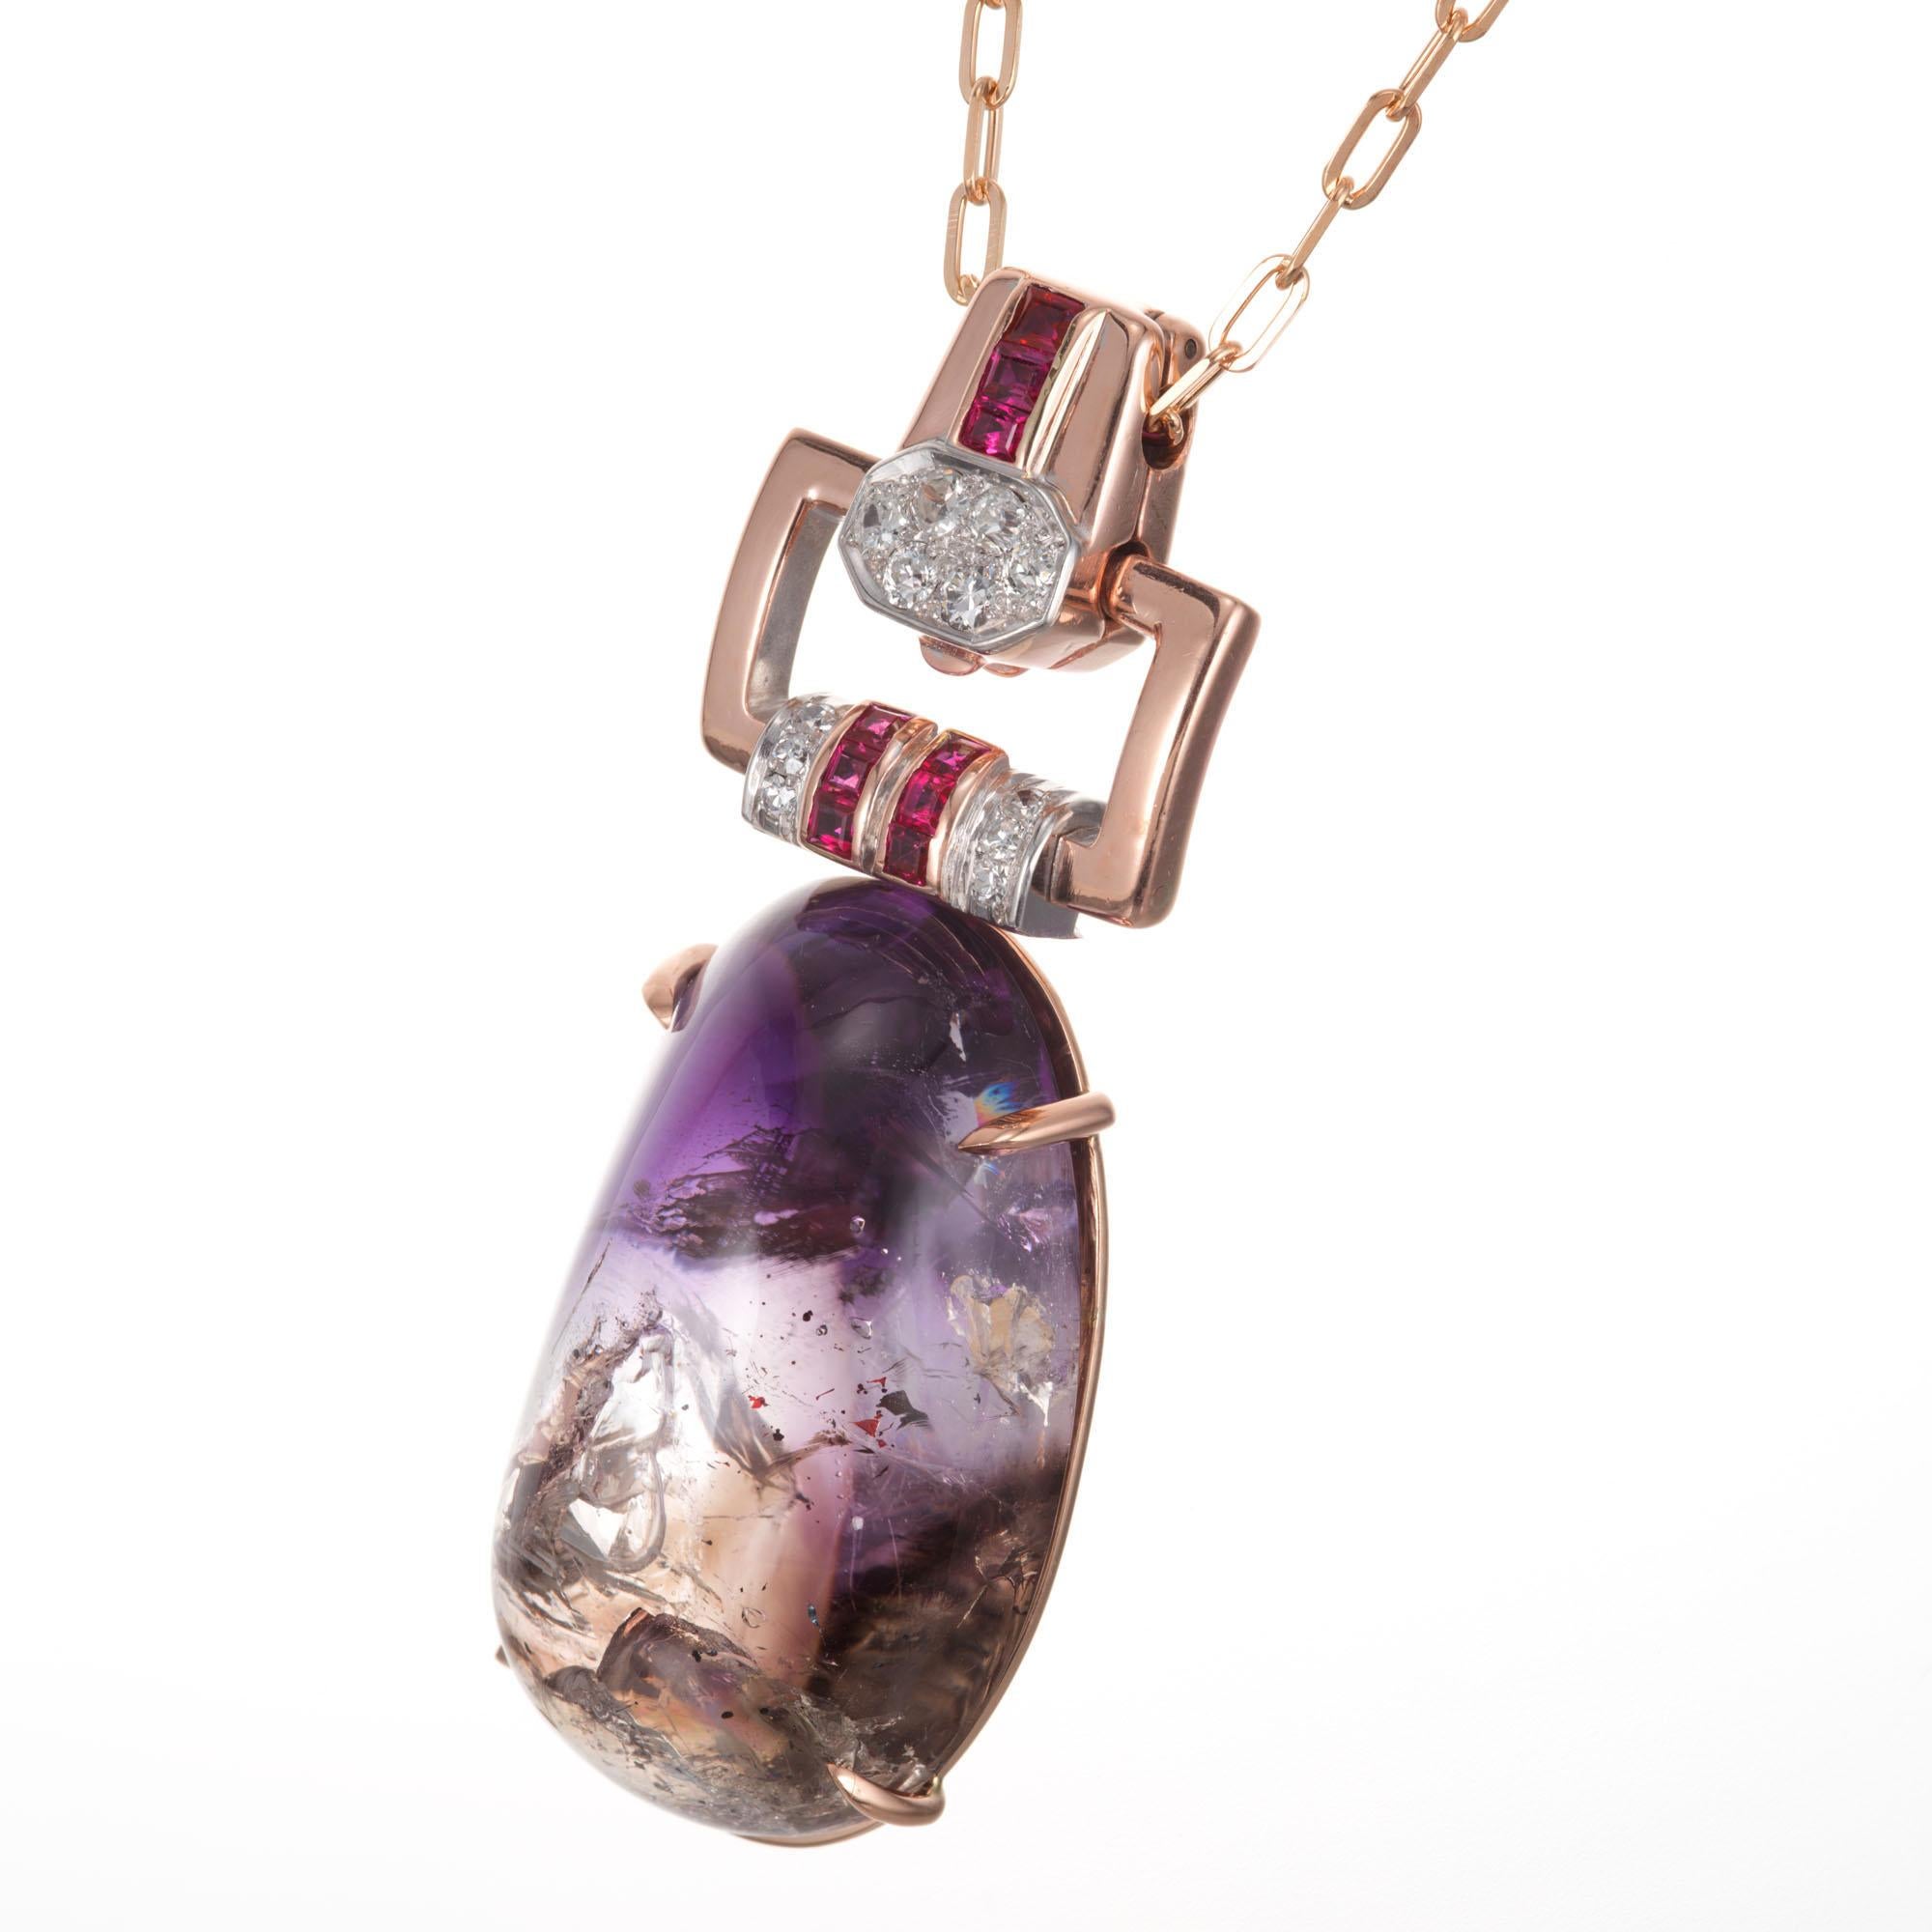 Art Deco Oval quartz, ruby and diamond pendant necklace. 40.00ct ova quartz, all natural and untreated with Amethyst shaded top and natural mineral inclusions including a liquid filled crystal inclusion with a gas bubble within the clear liquid that